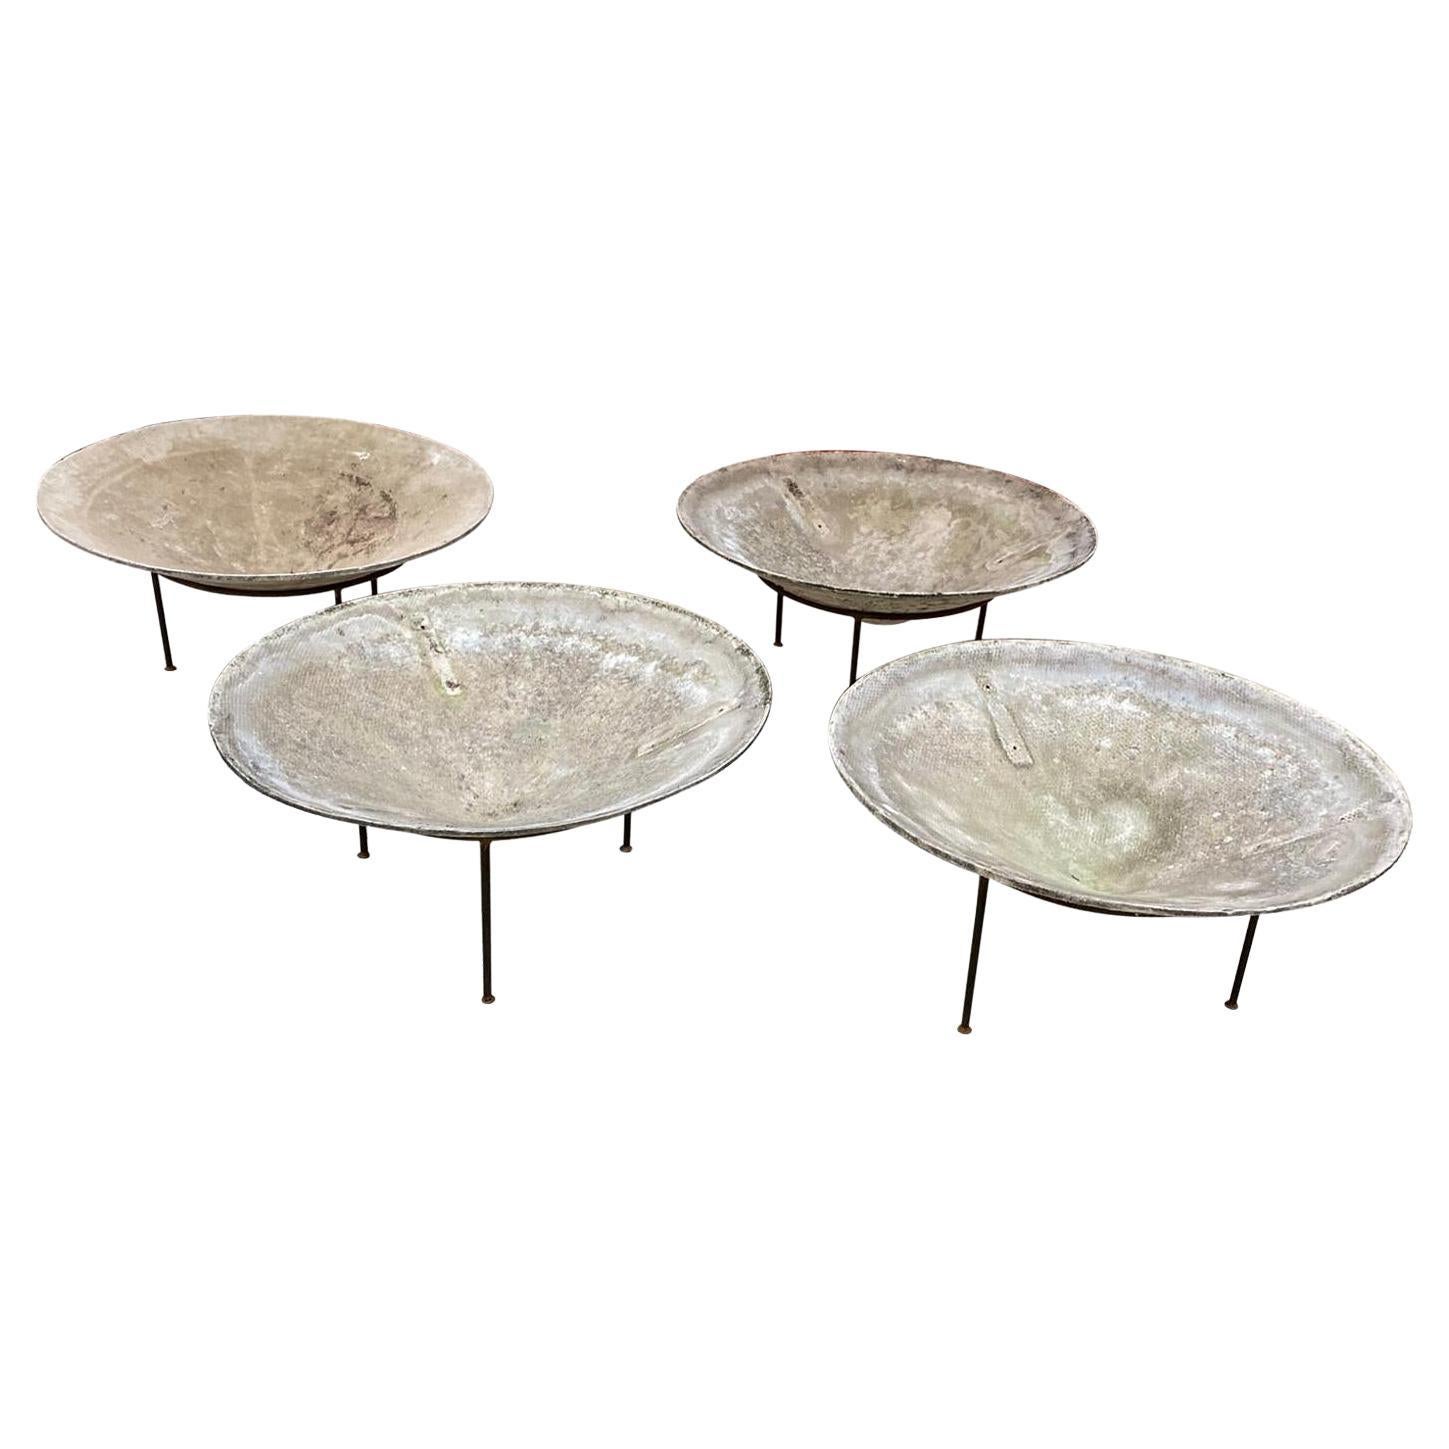 3 Large Eternit Saucer Planters Designed by Willy Guhl with Wrought Iron Base For Sale